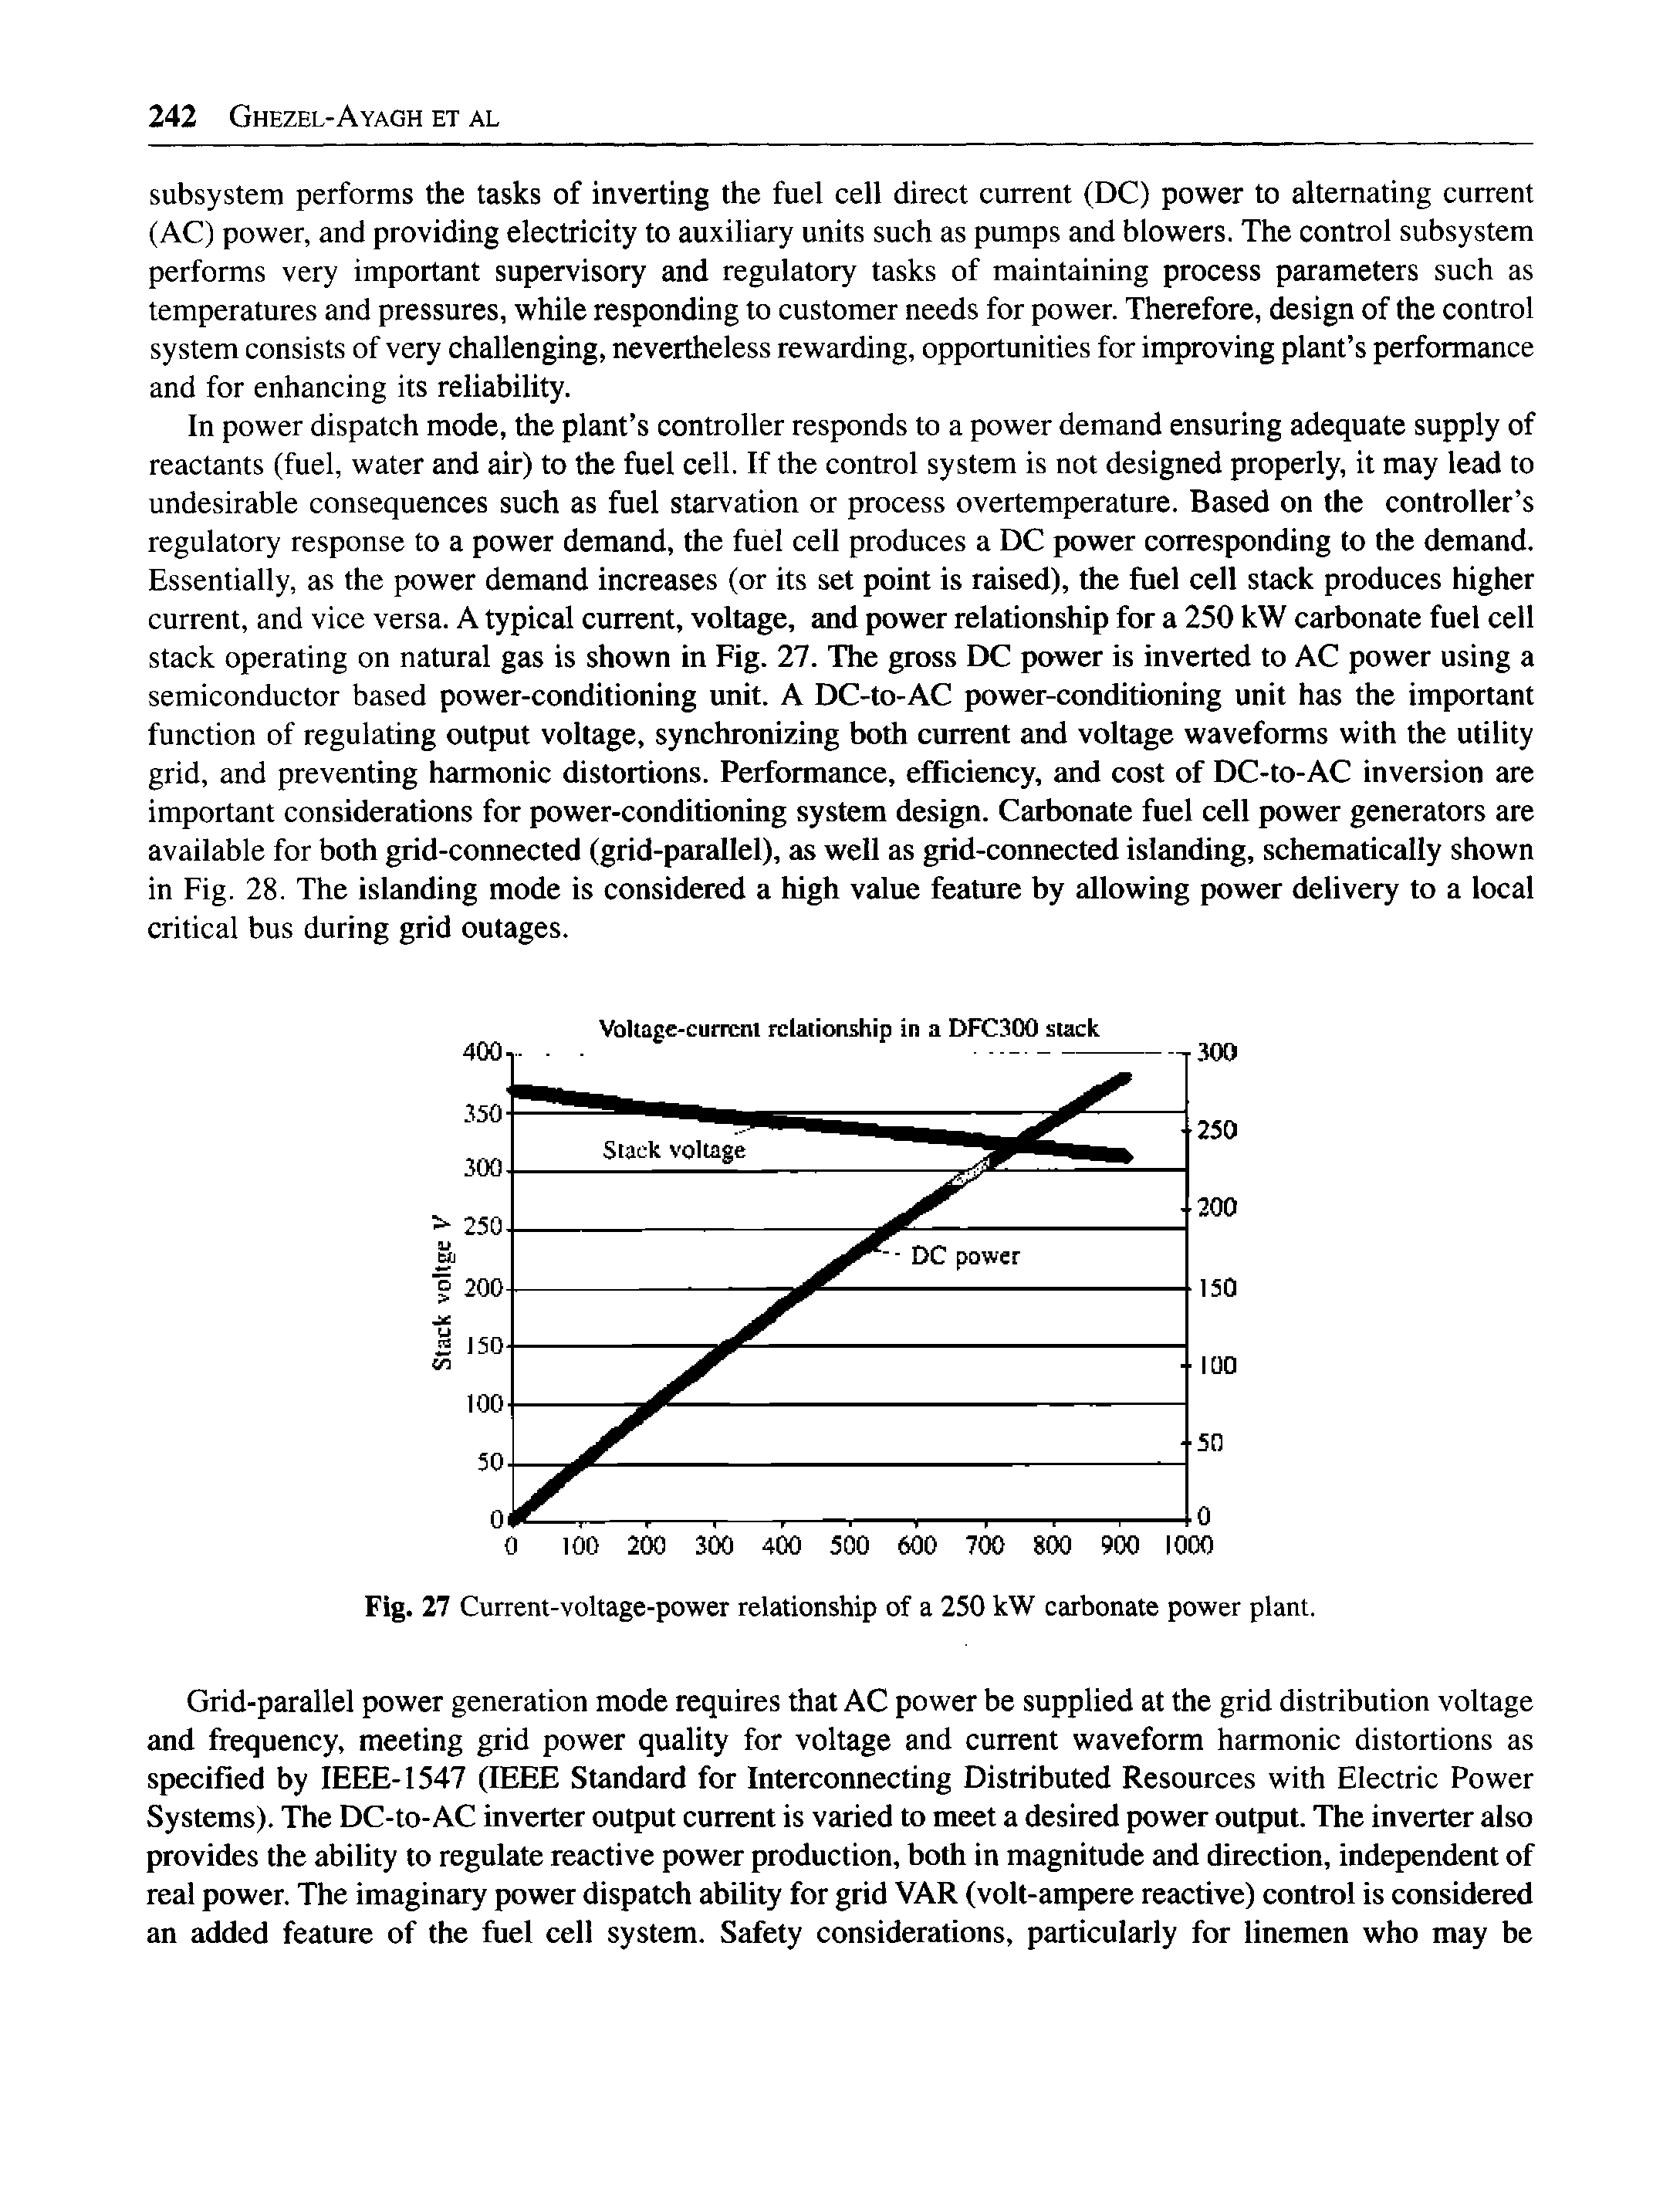 Fig. 27 Current-voltage-power relationship of a 250 kW carbonate power plant.